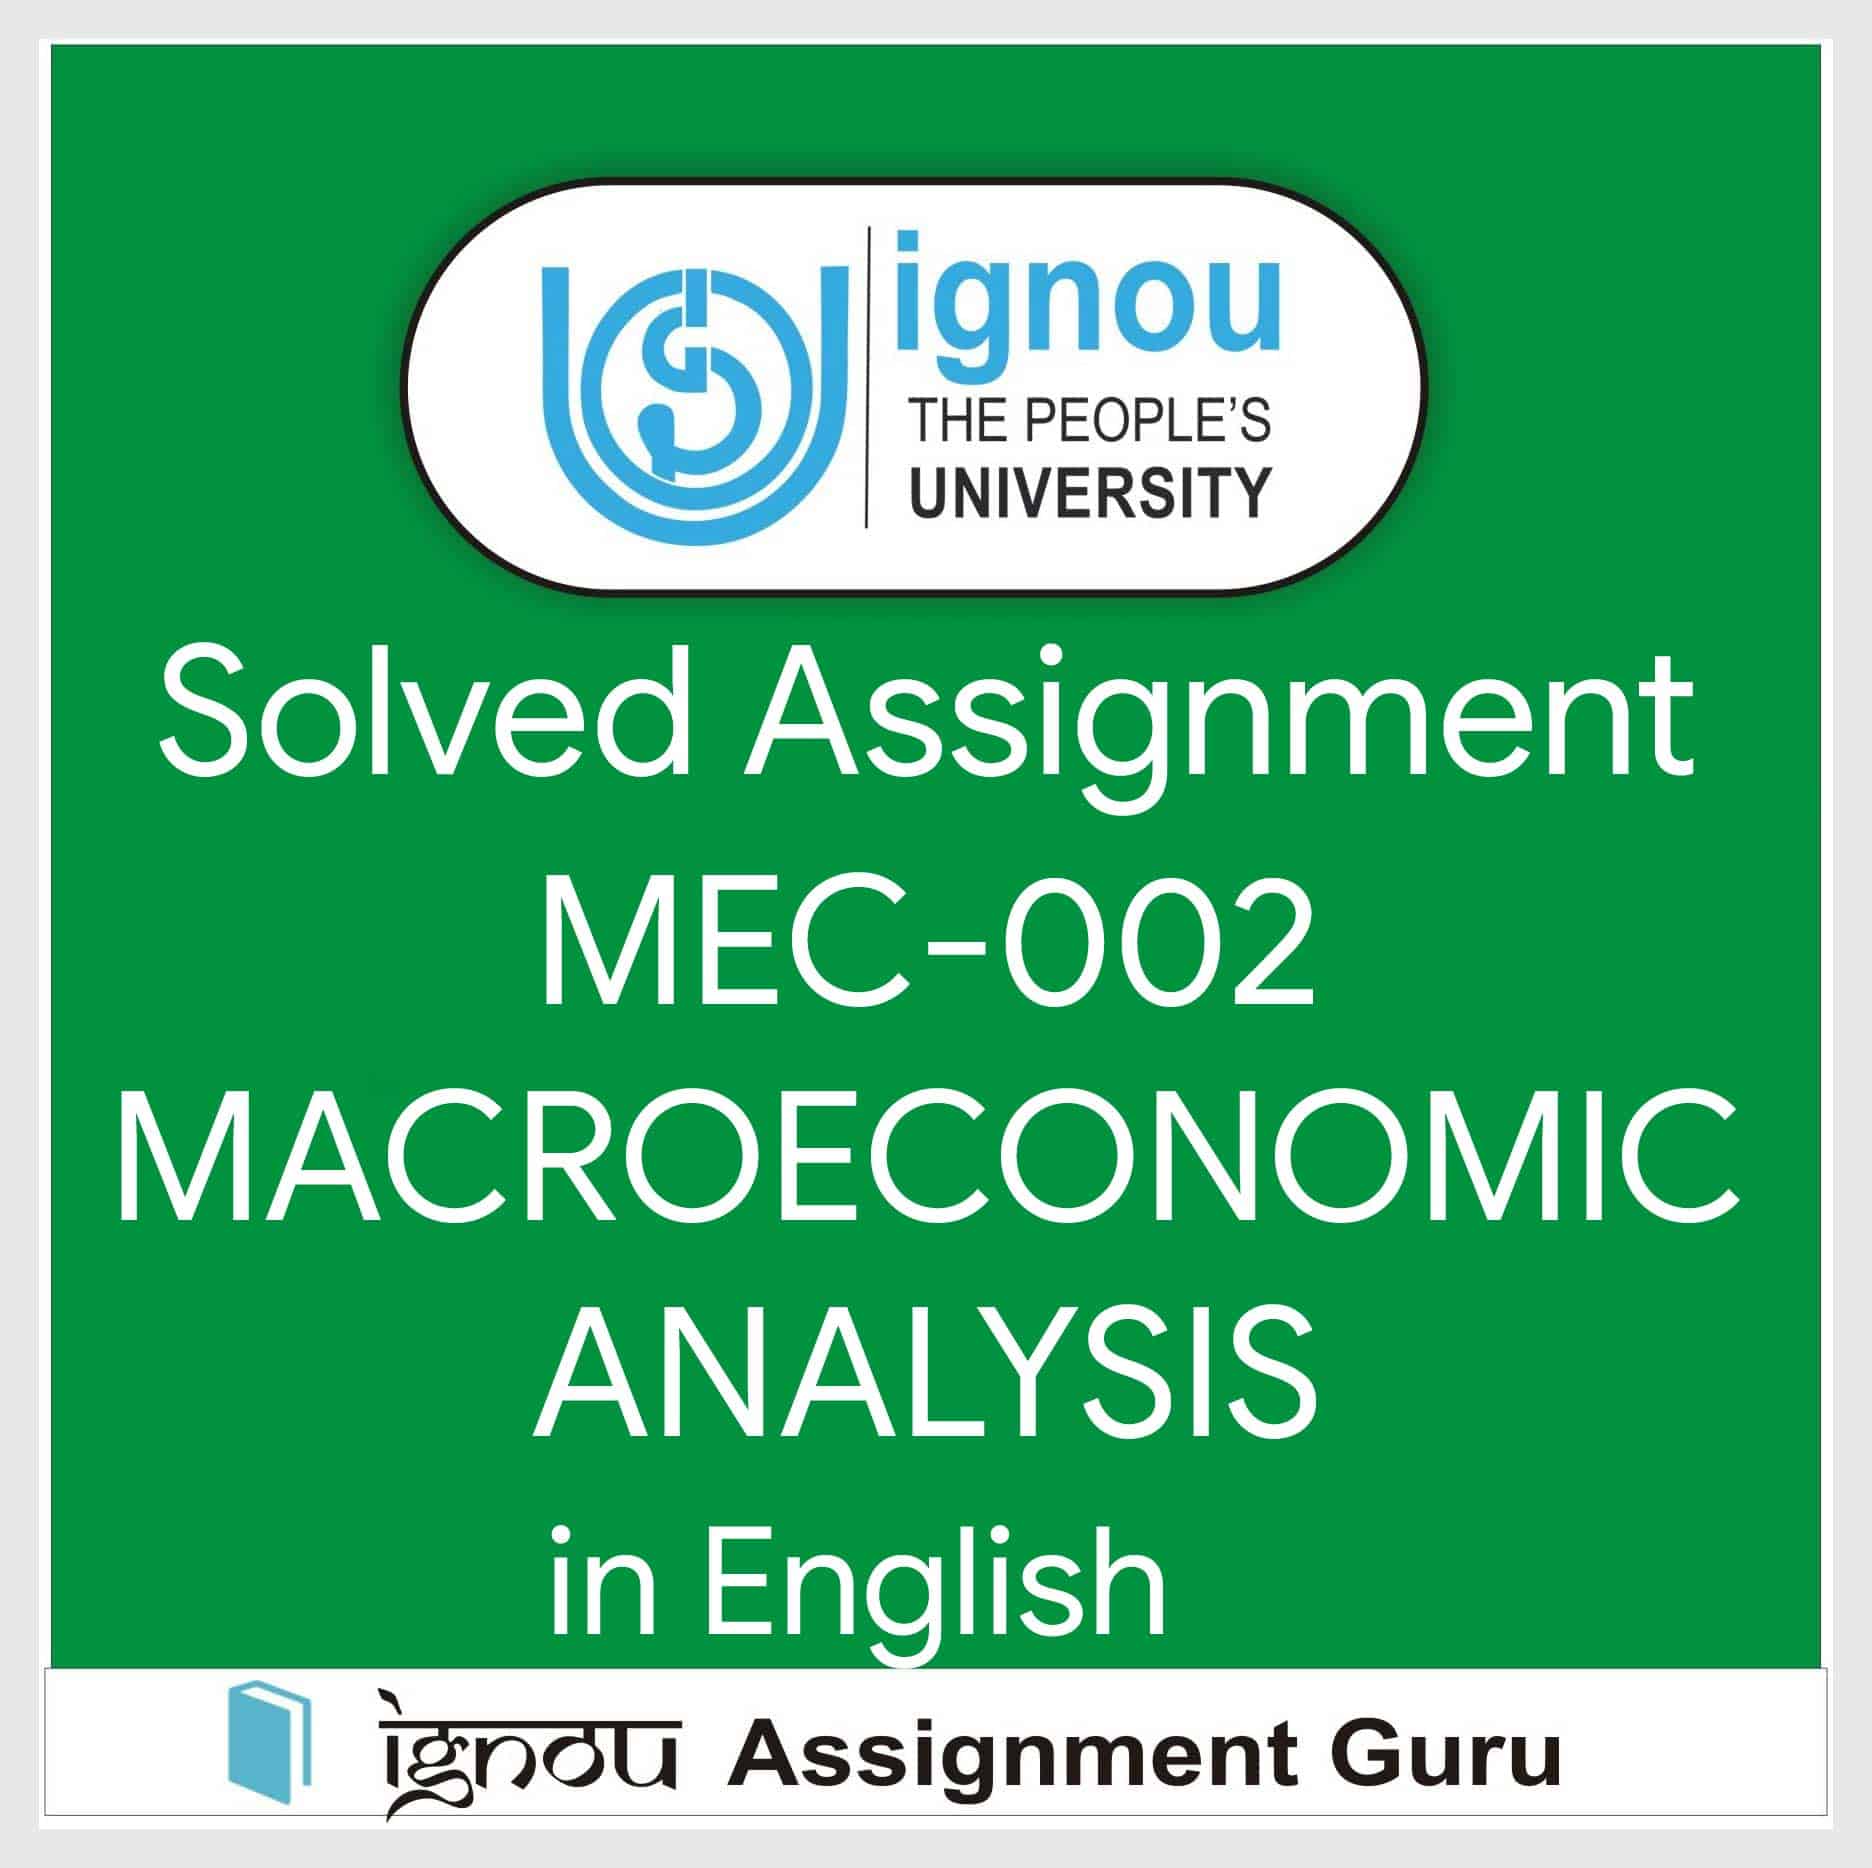 MEC-002 MACROECONOMIC ANALYSIS in English Solved Assignment 2022-2023